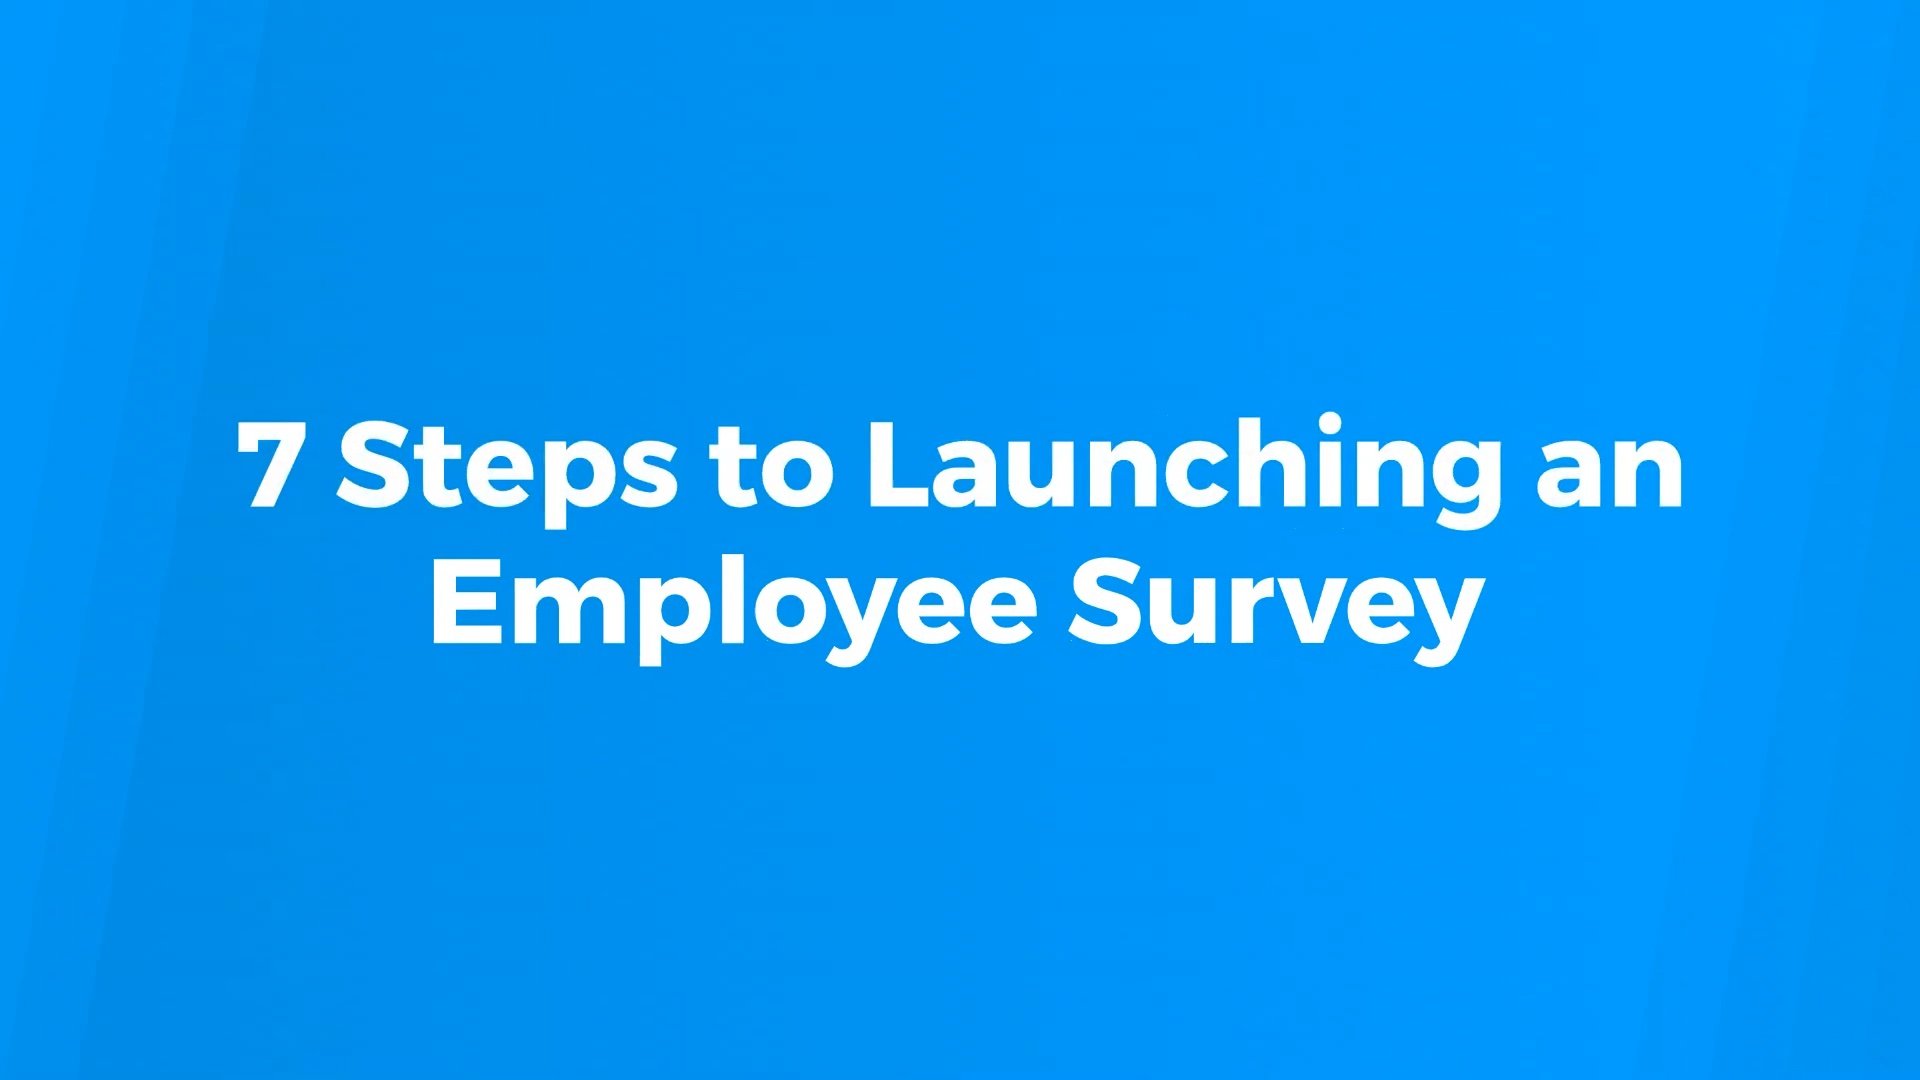 7 Steps to Launching an Employee Survey